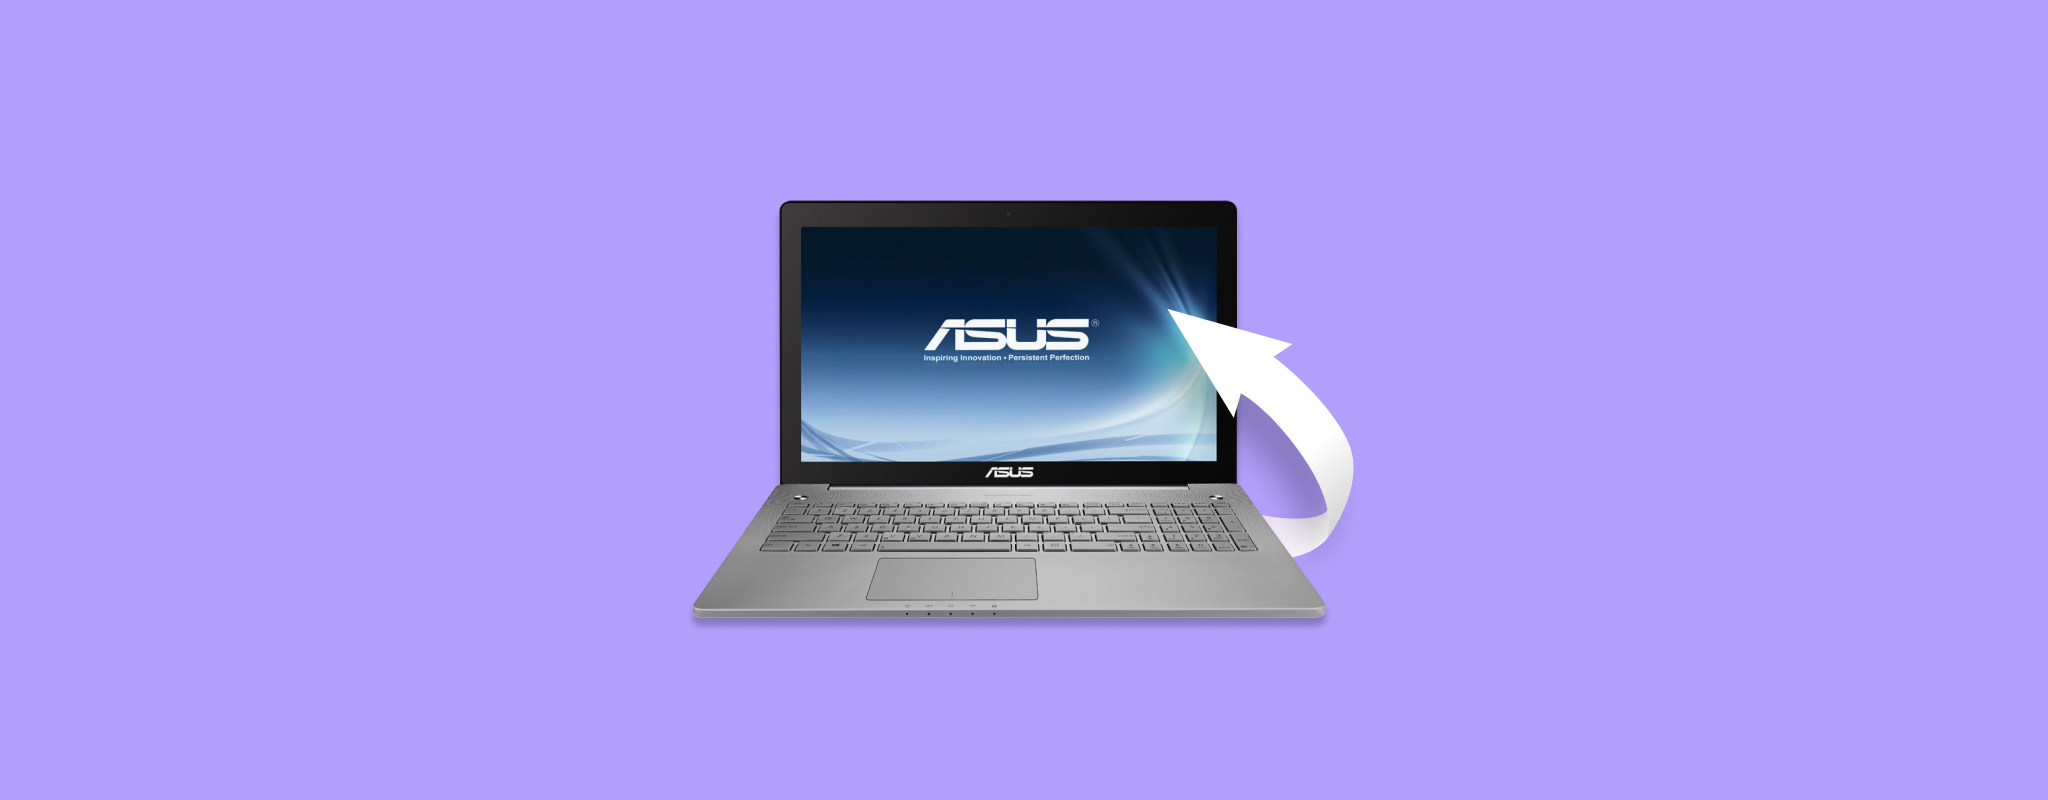 asus data recovery